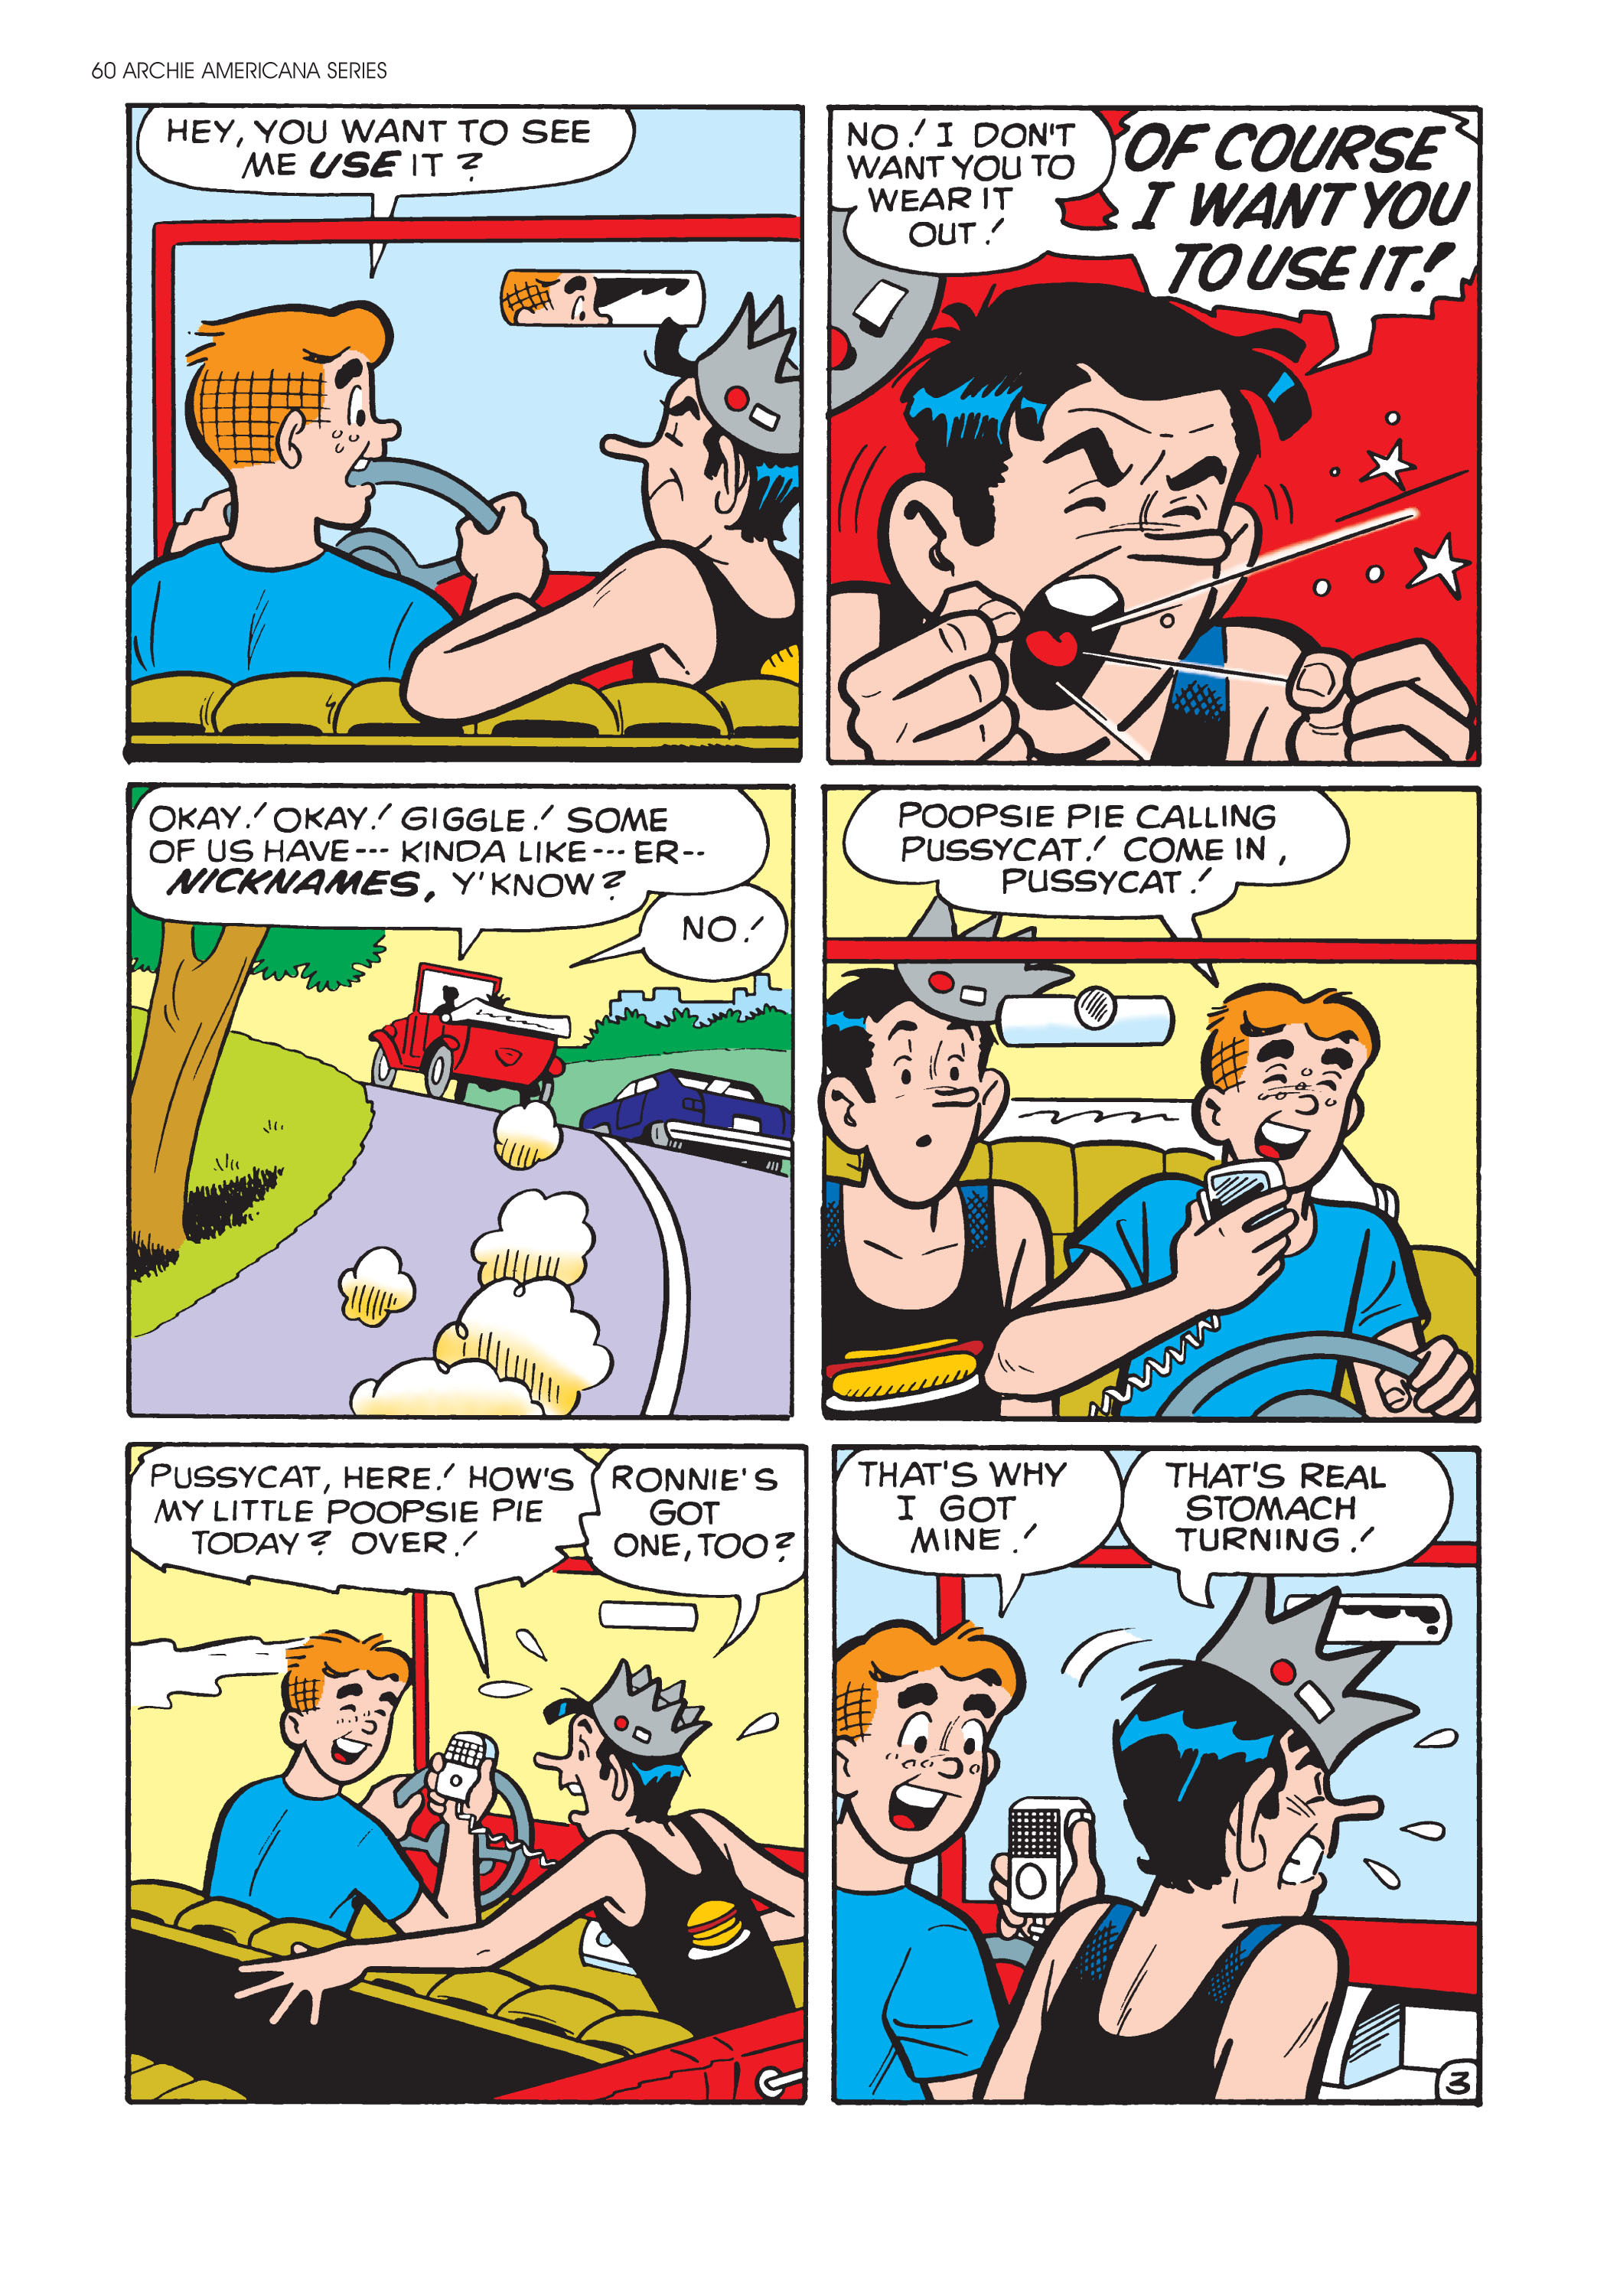 Read online Archie Americana Series comic -  Issue # TPB 4 - 62